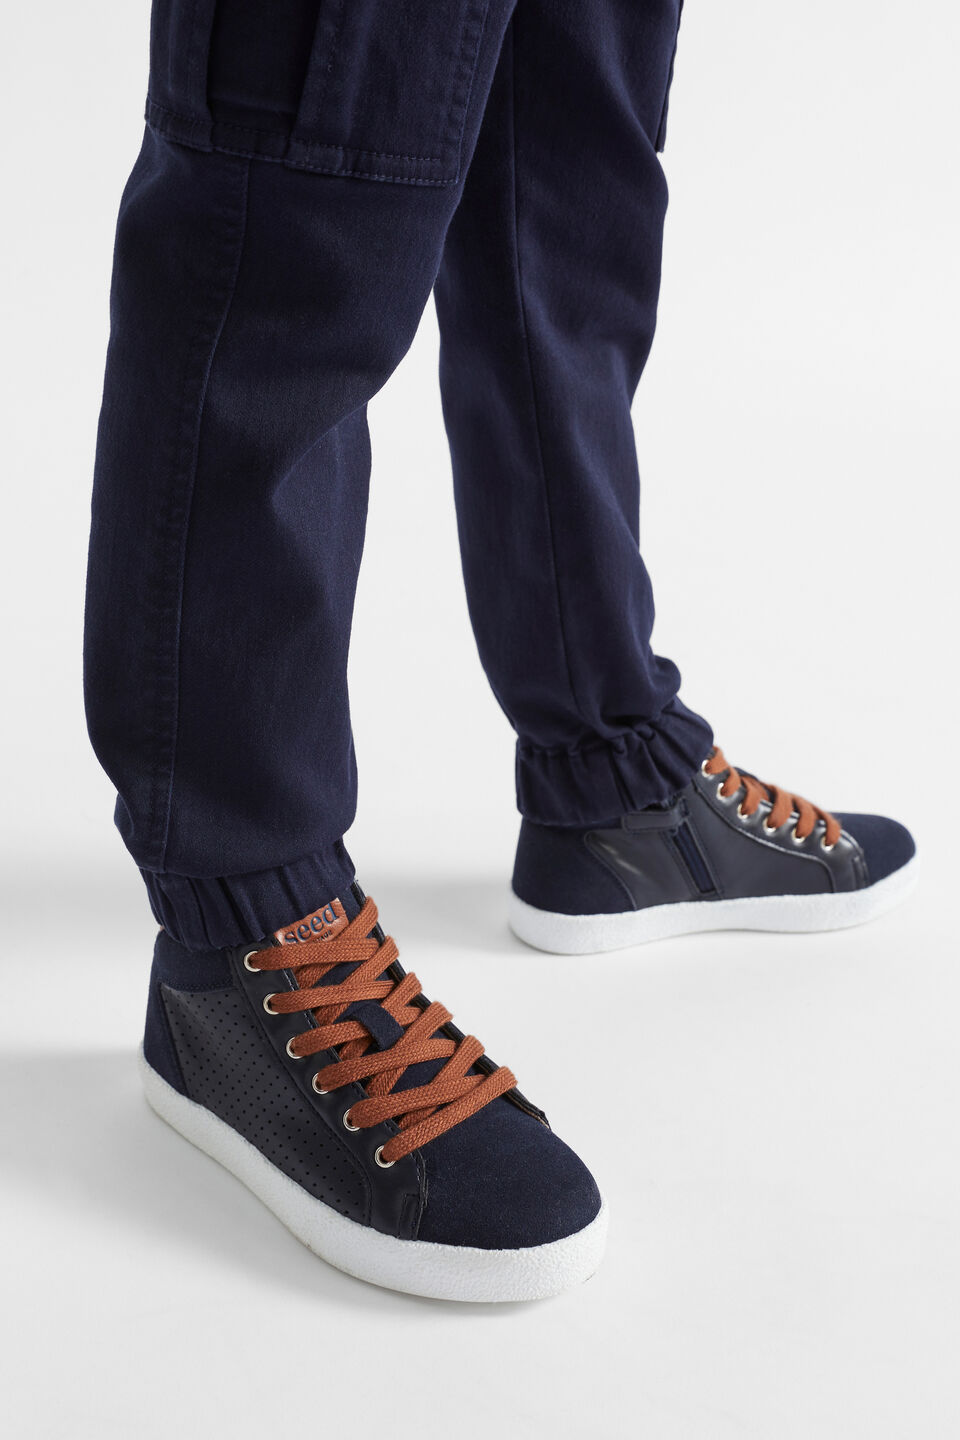 Perforated High top  Navy